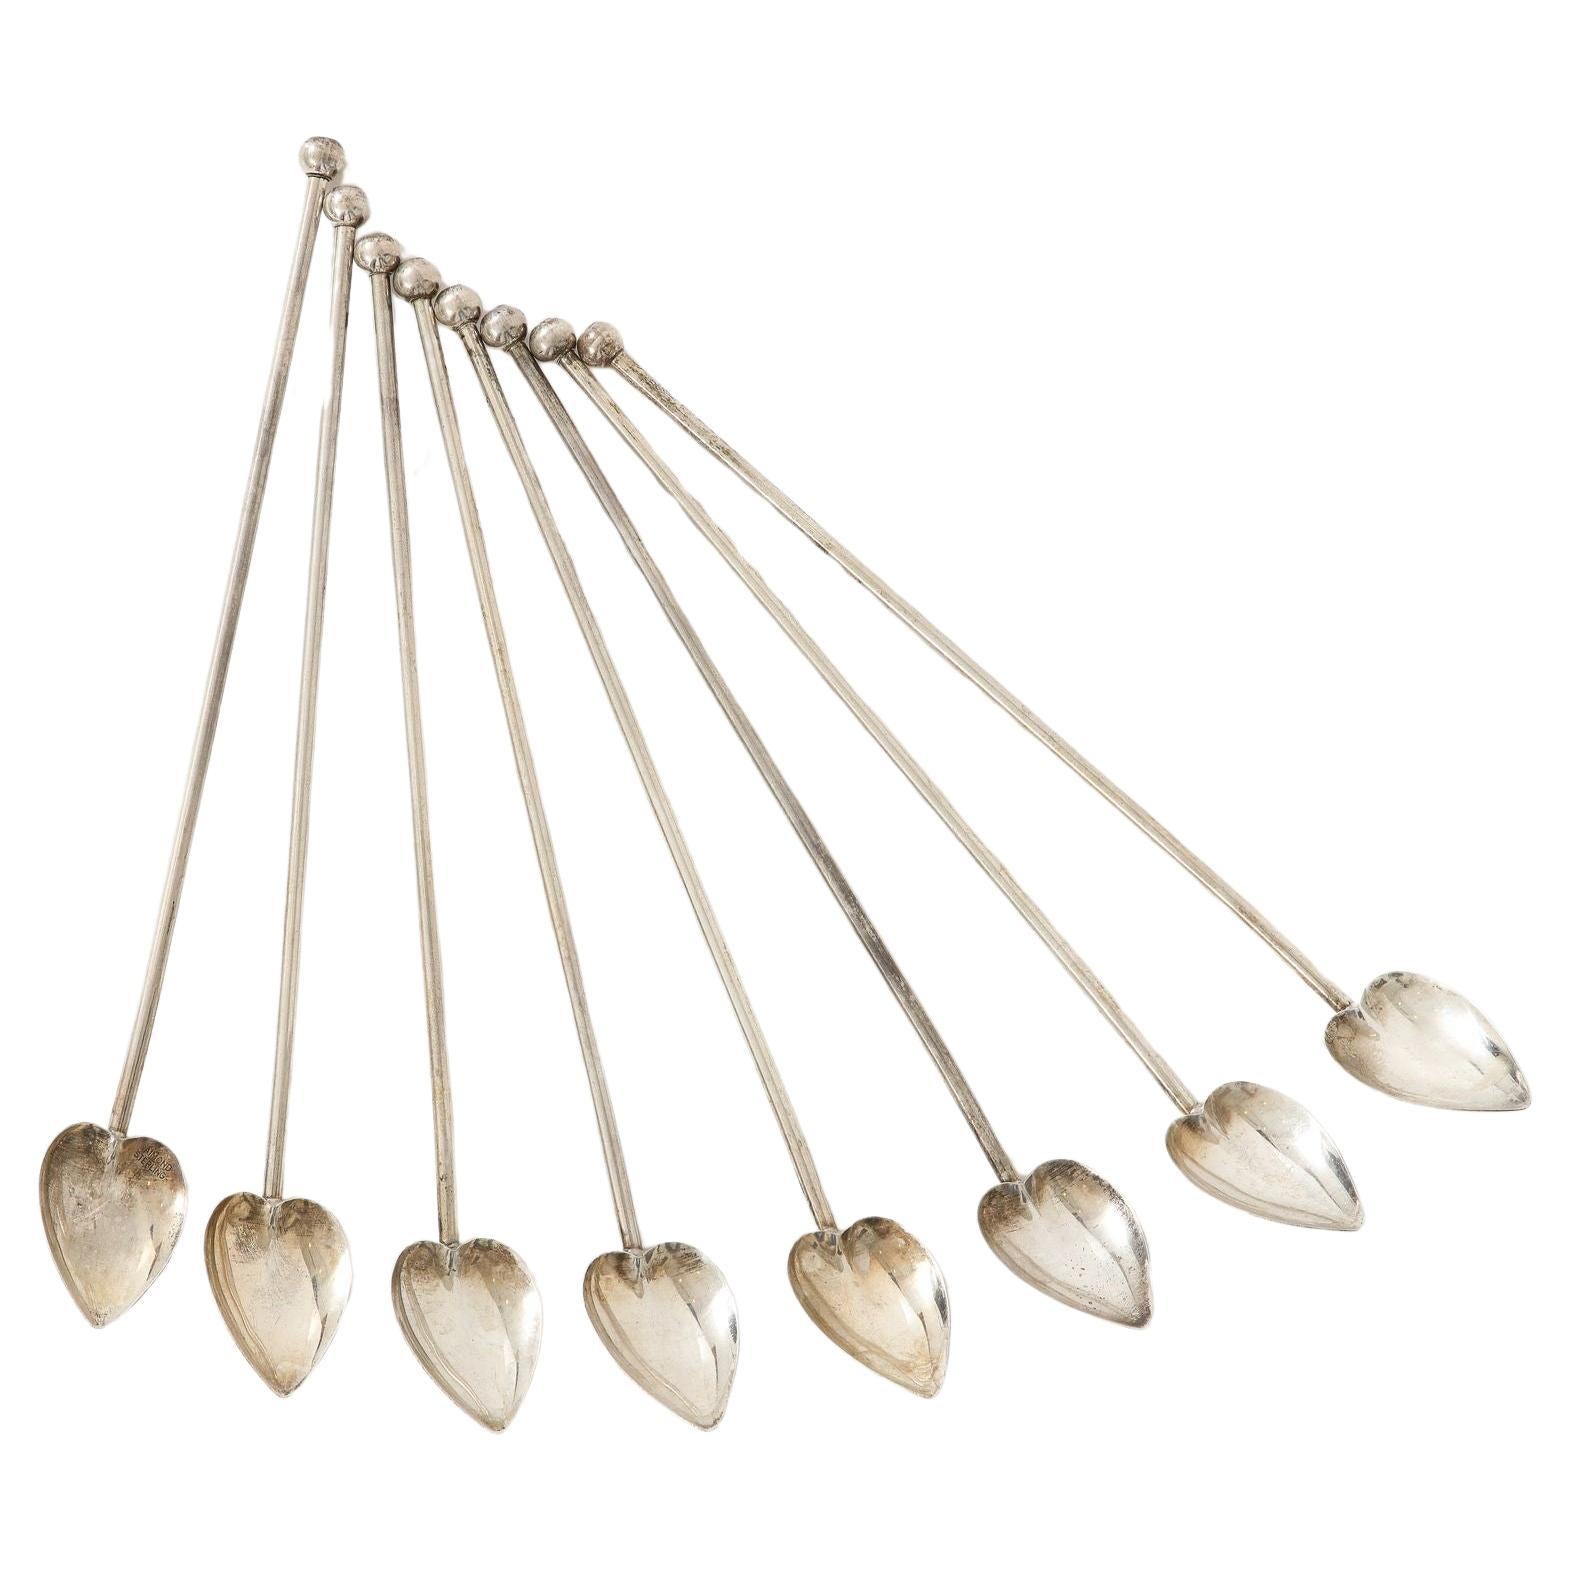 8 Sterling Silver Cocktail Heart Shaped Spoons/Straws